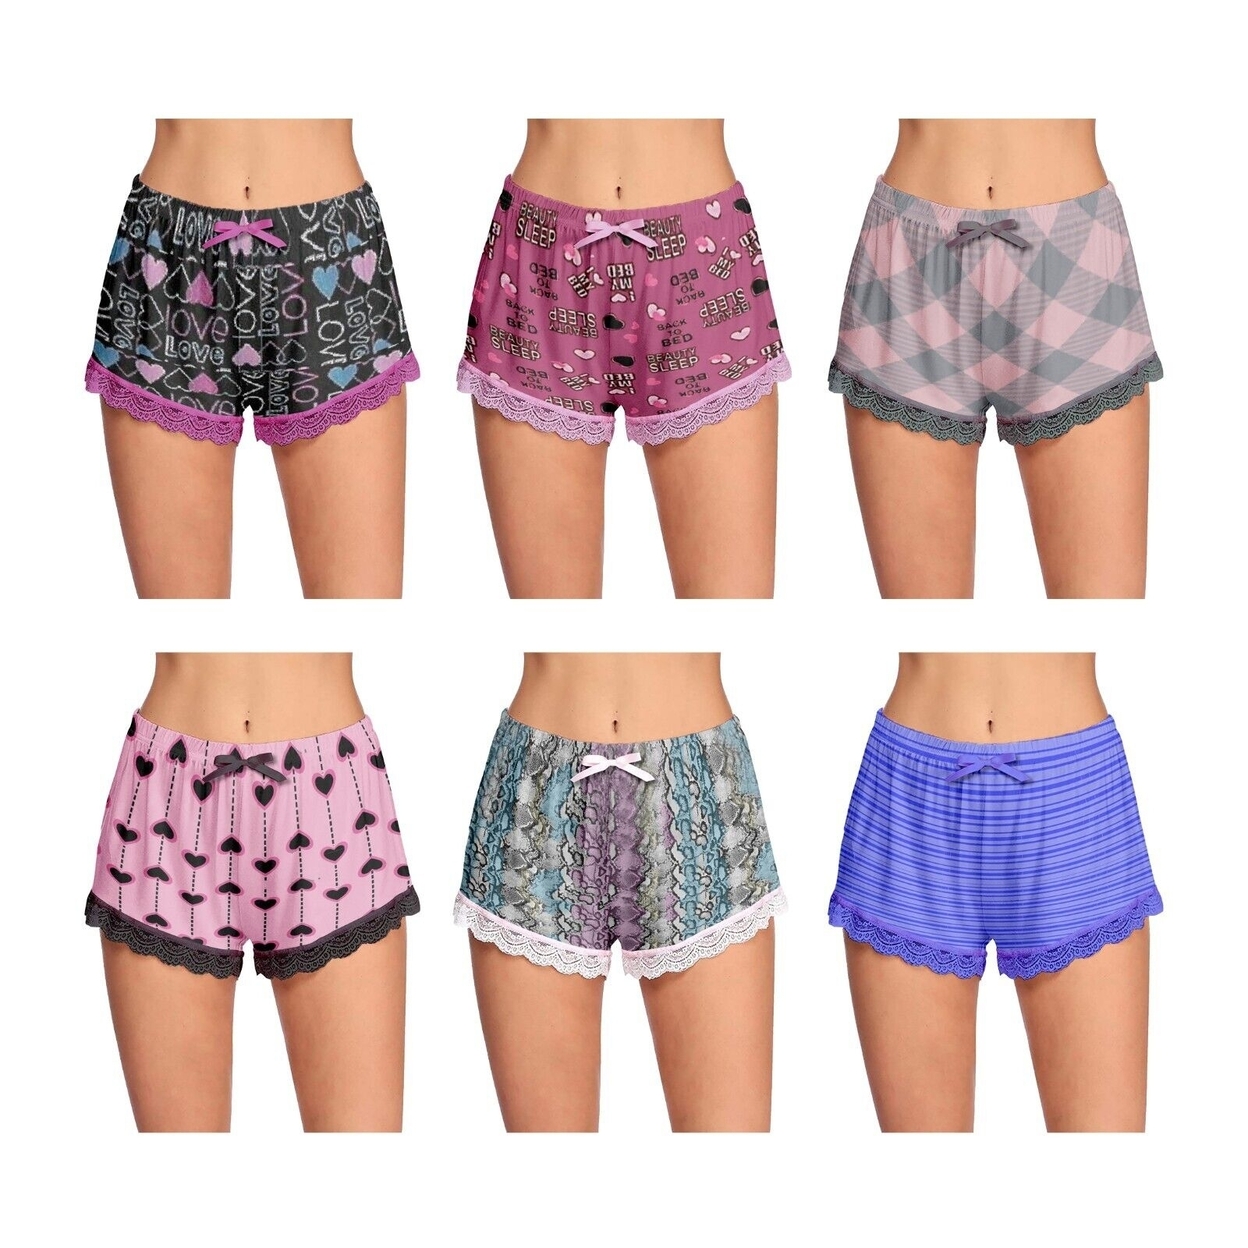 4-Pack: Women's Ultra-Soft Cozy Fun Printed Lace Trim Pajama Lounge Shorts - Small, Shapes